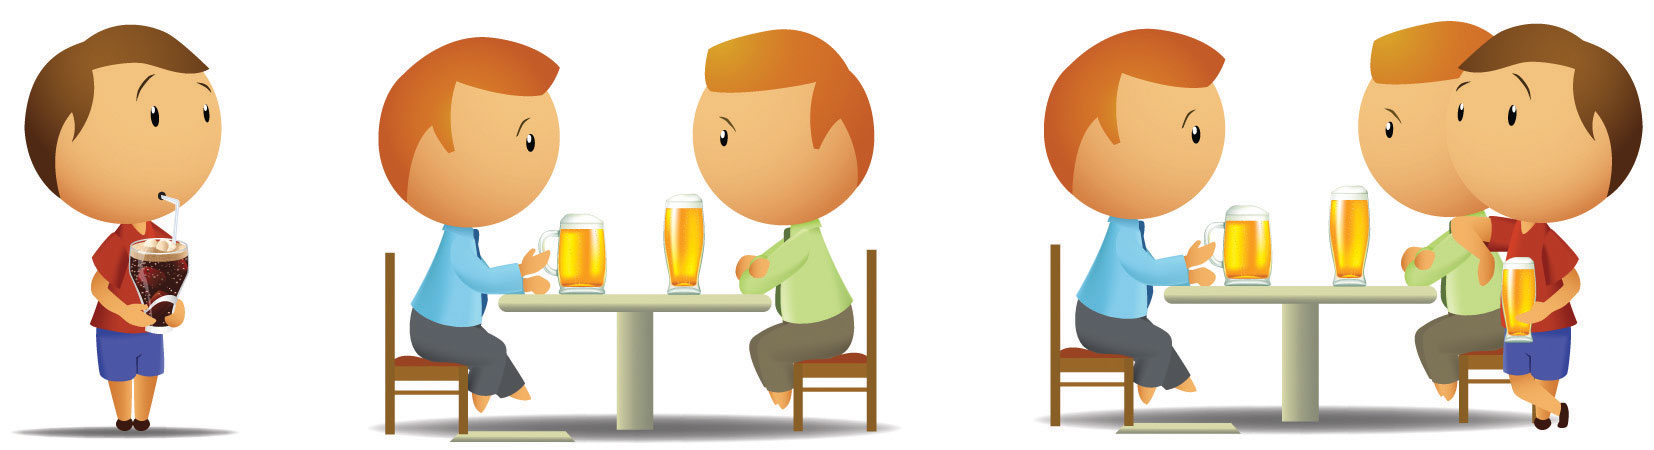 Picture 1: (Man 1 drinking a soda watching two other men sitting at a table drinking beer), Picture 2: (Man 1 drinking beer with the other two men)